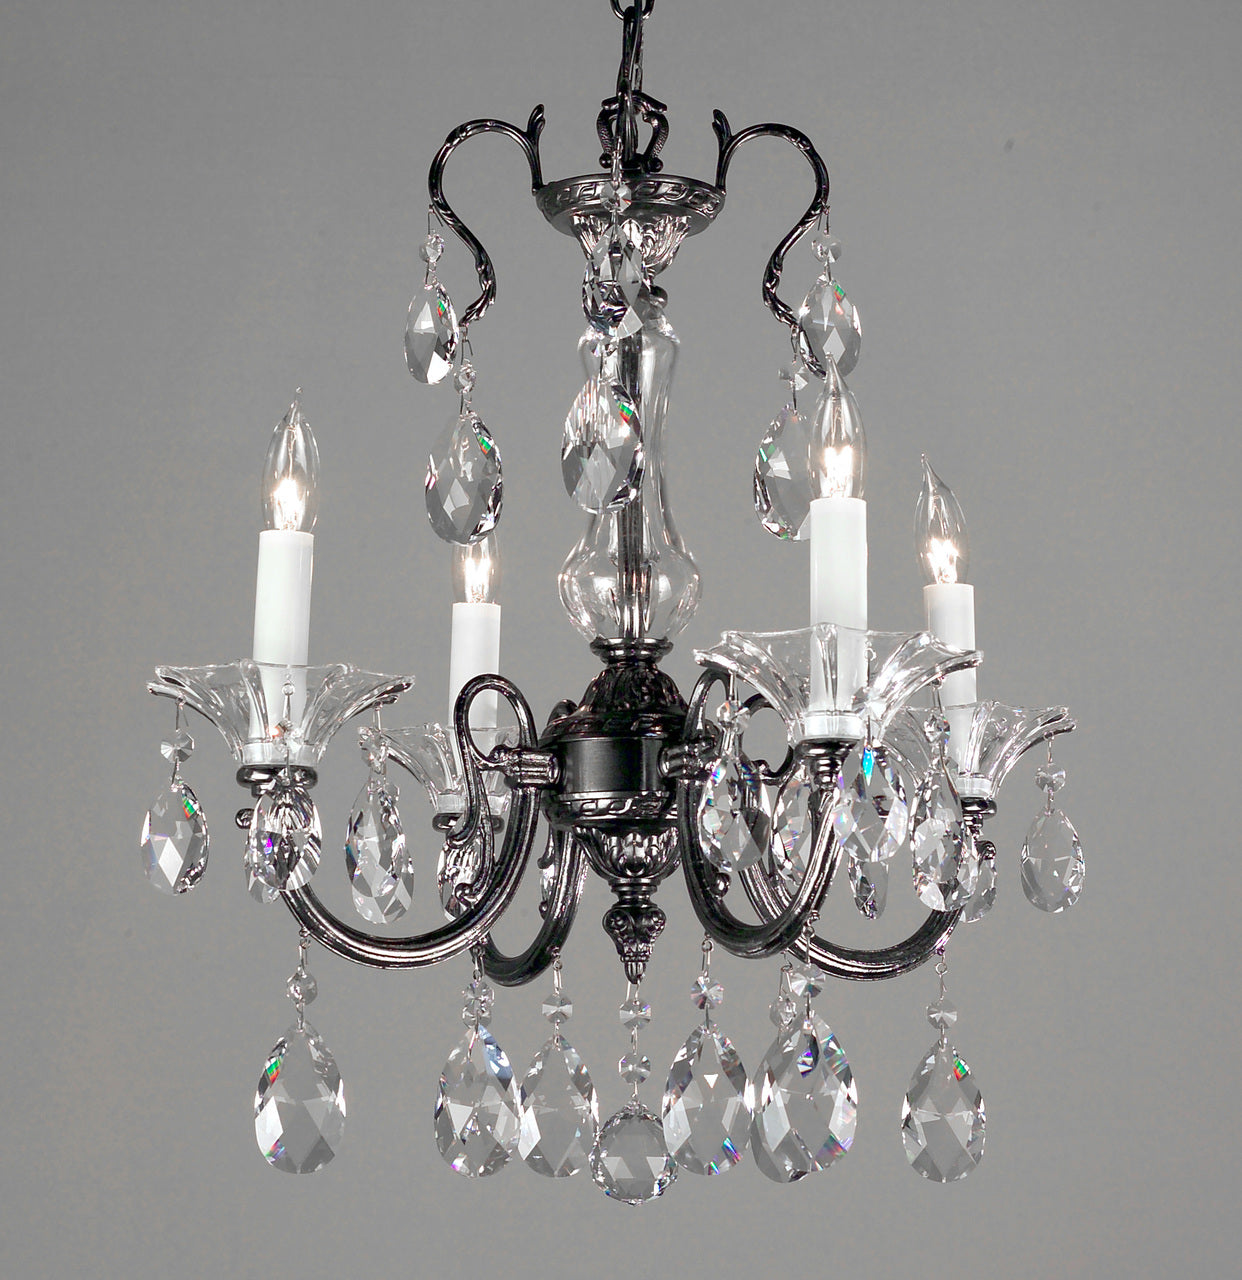 Classic Lighting 57054 G CBK Via Lombardi Crystal Mini Chandelier in 24k Gold (Imported from Spain)